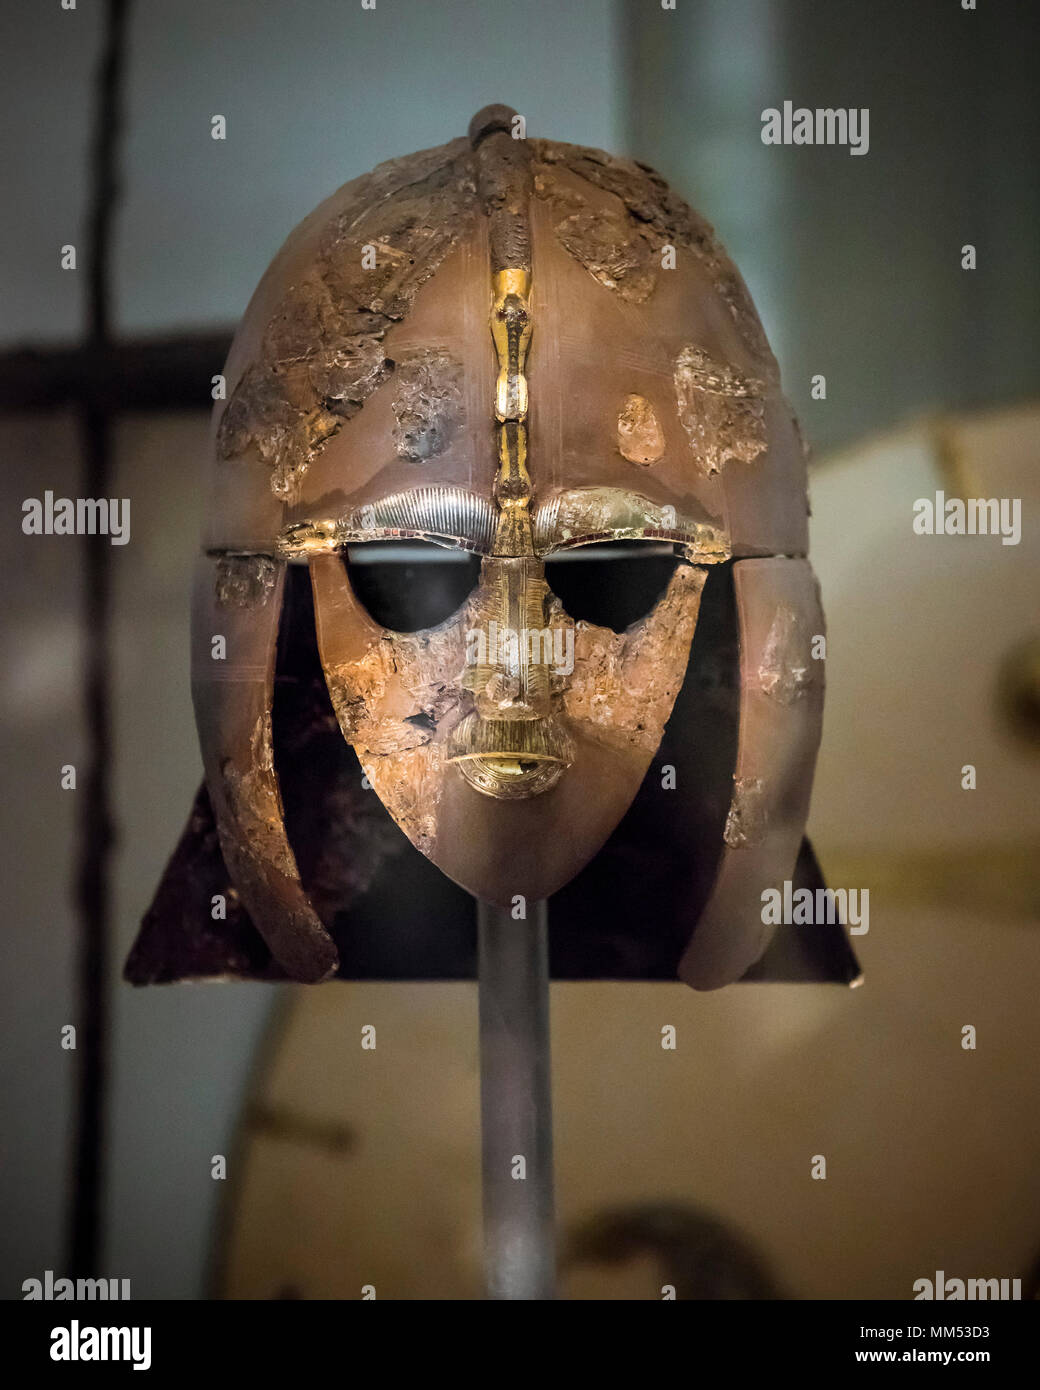 London. England. British Museum. The Sutton Hoo Helmet.  The Sutton Hoo ship burial in Suffolk, England, excavated in 1939, is one of the most signifi Stock Photo